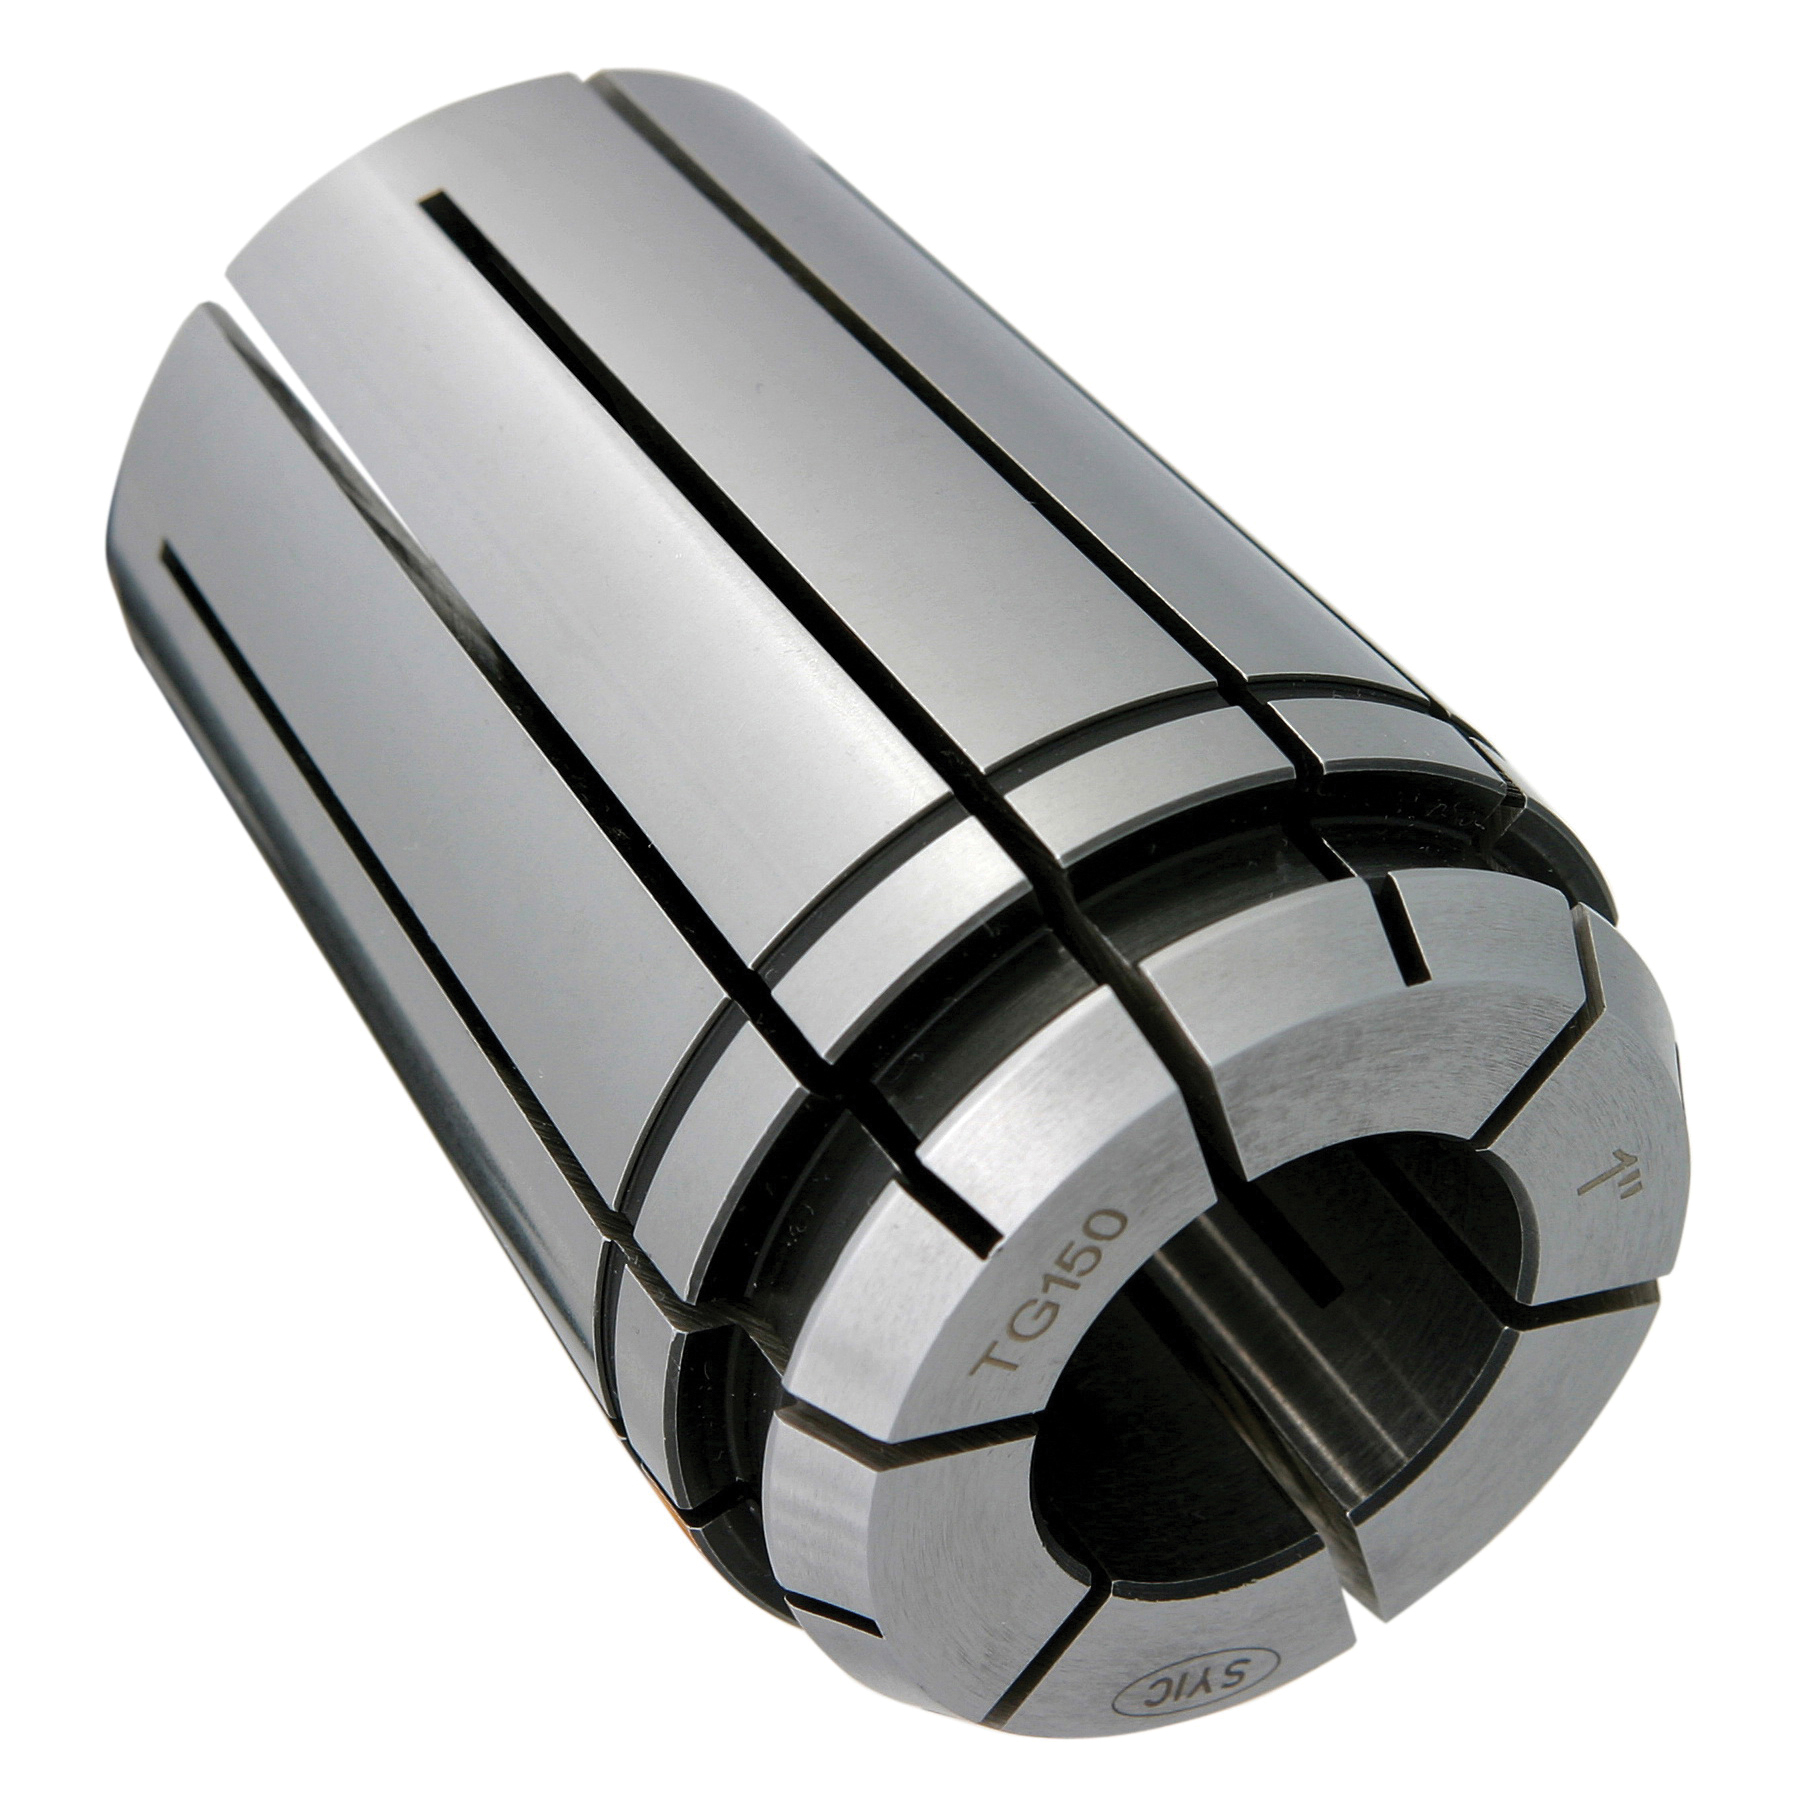 TG150 1-9/32" COLLET